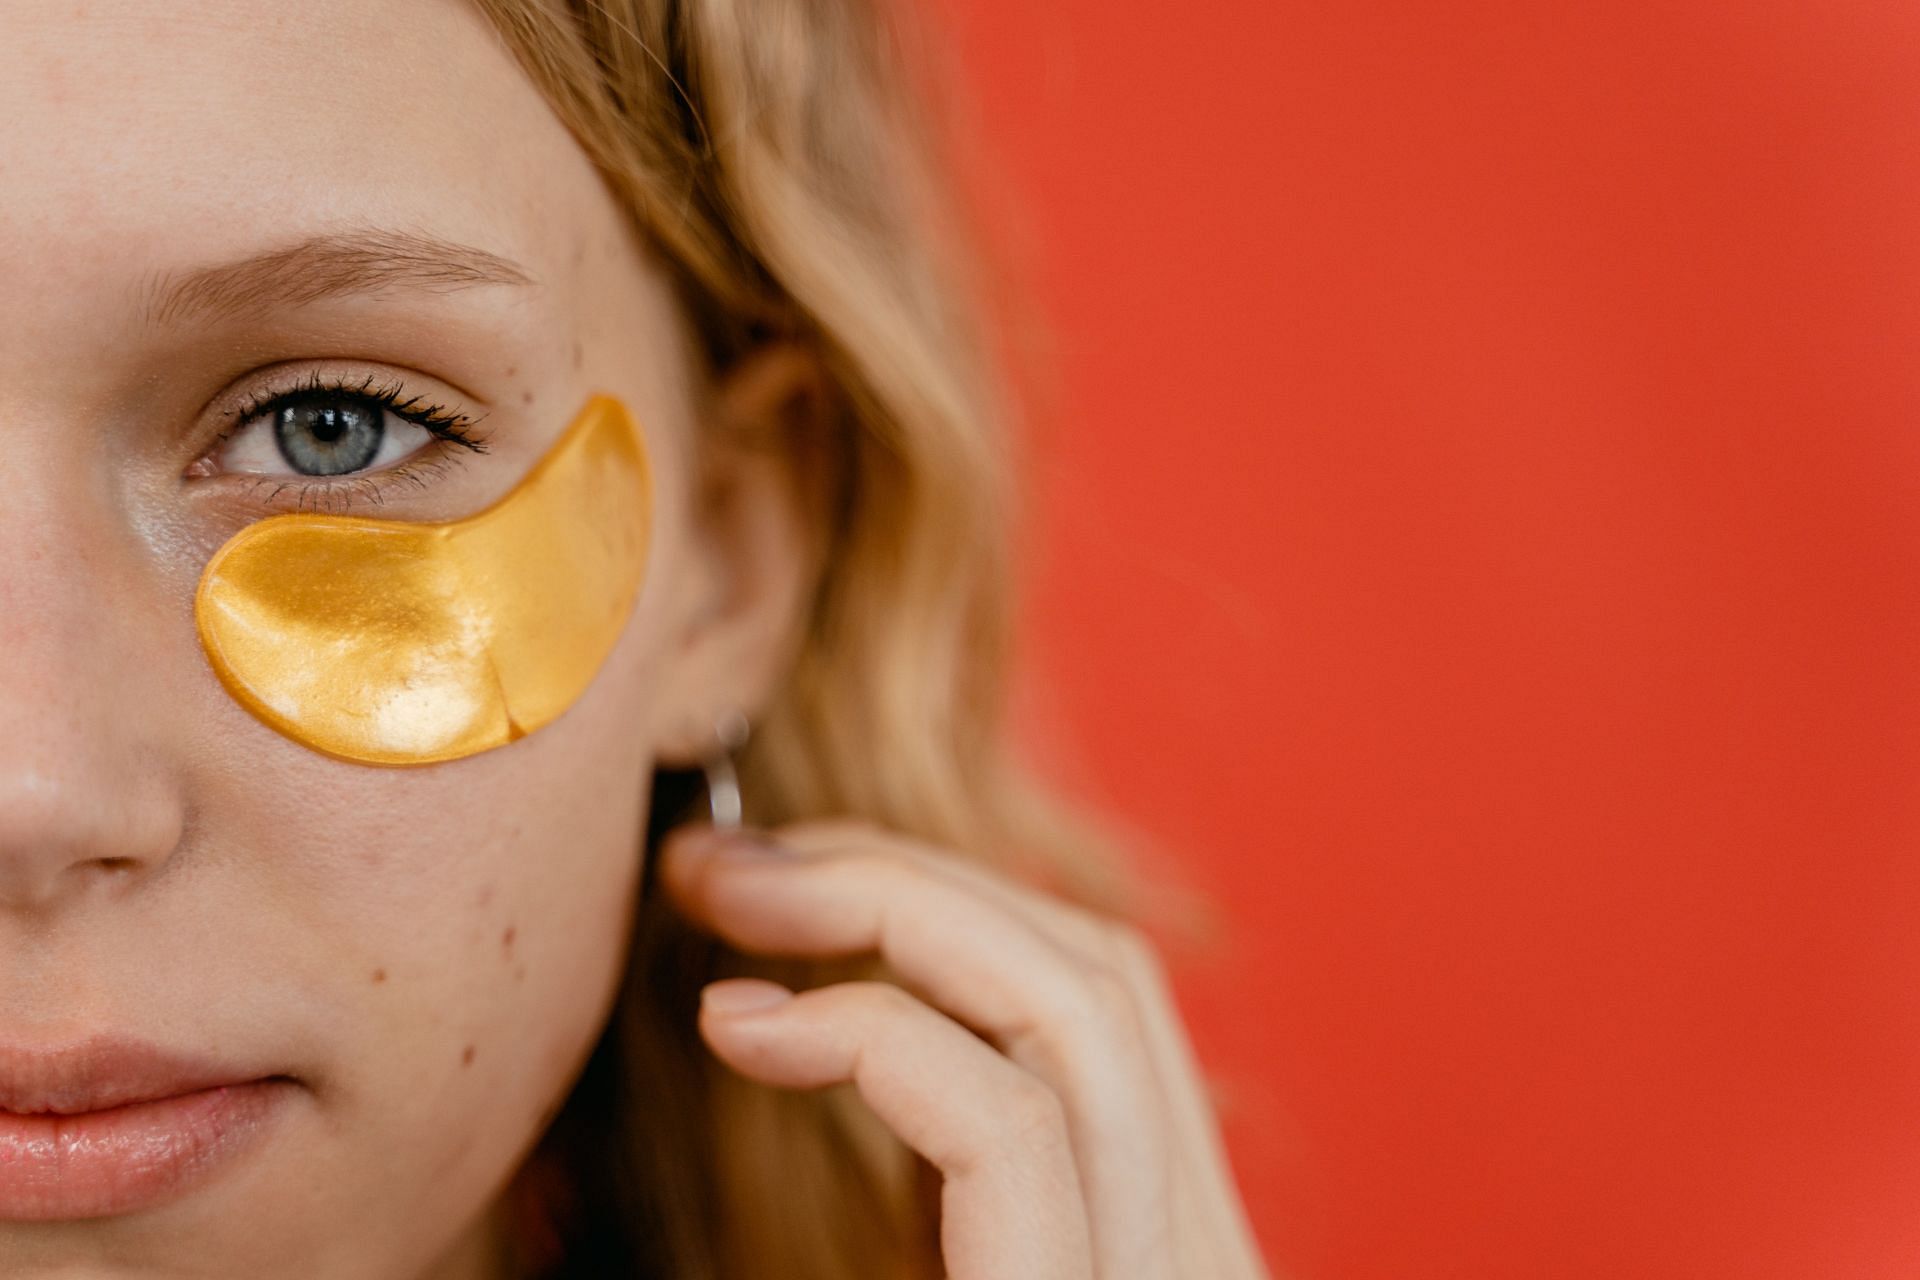 Got bags under eyes? We have a few ways to help you. (Image via pexels/Mart Production)